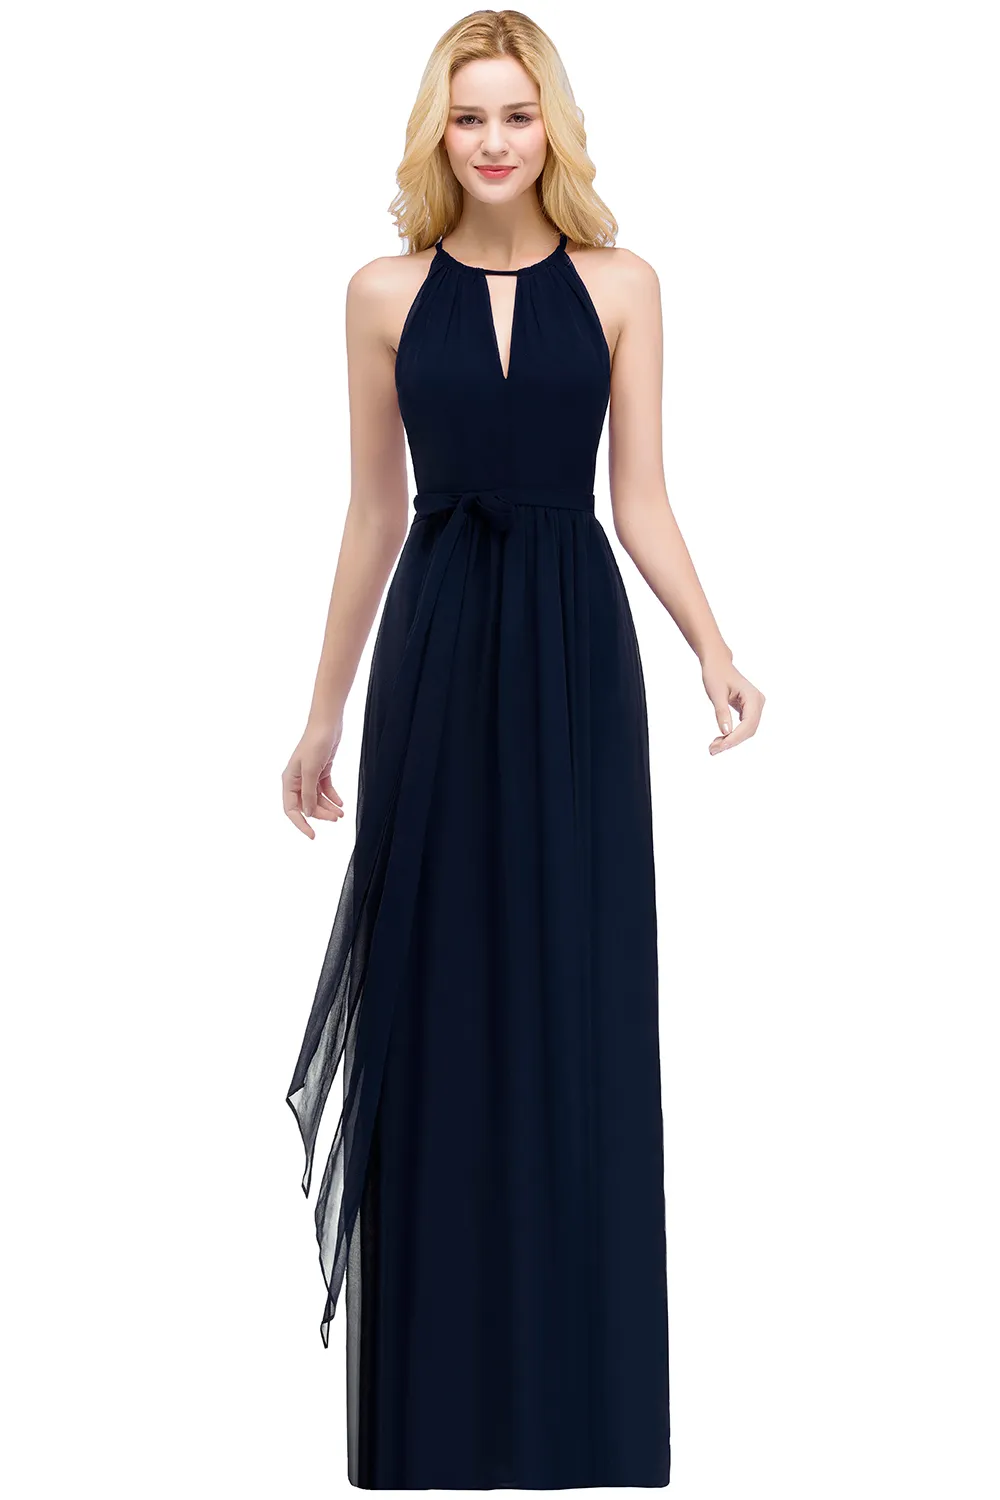 New Year's Evening Dresses Robe de soiree Elegant Halter Burgundy Navy Blue Long A Line Chiffon Formal Party Gown cps868